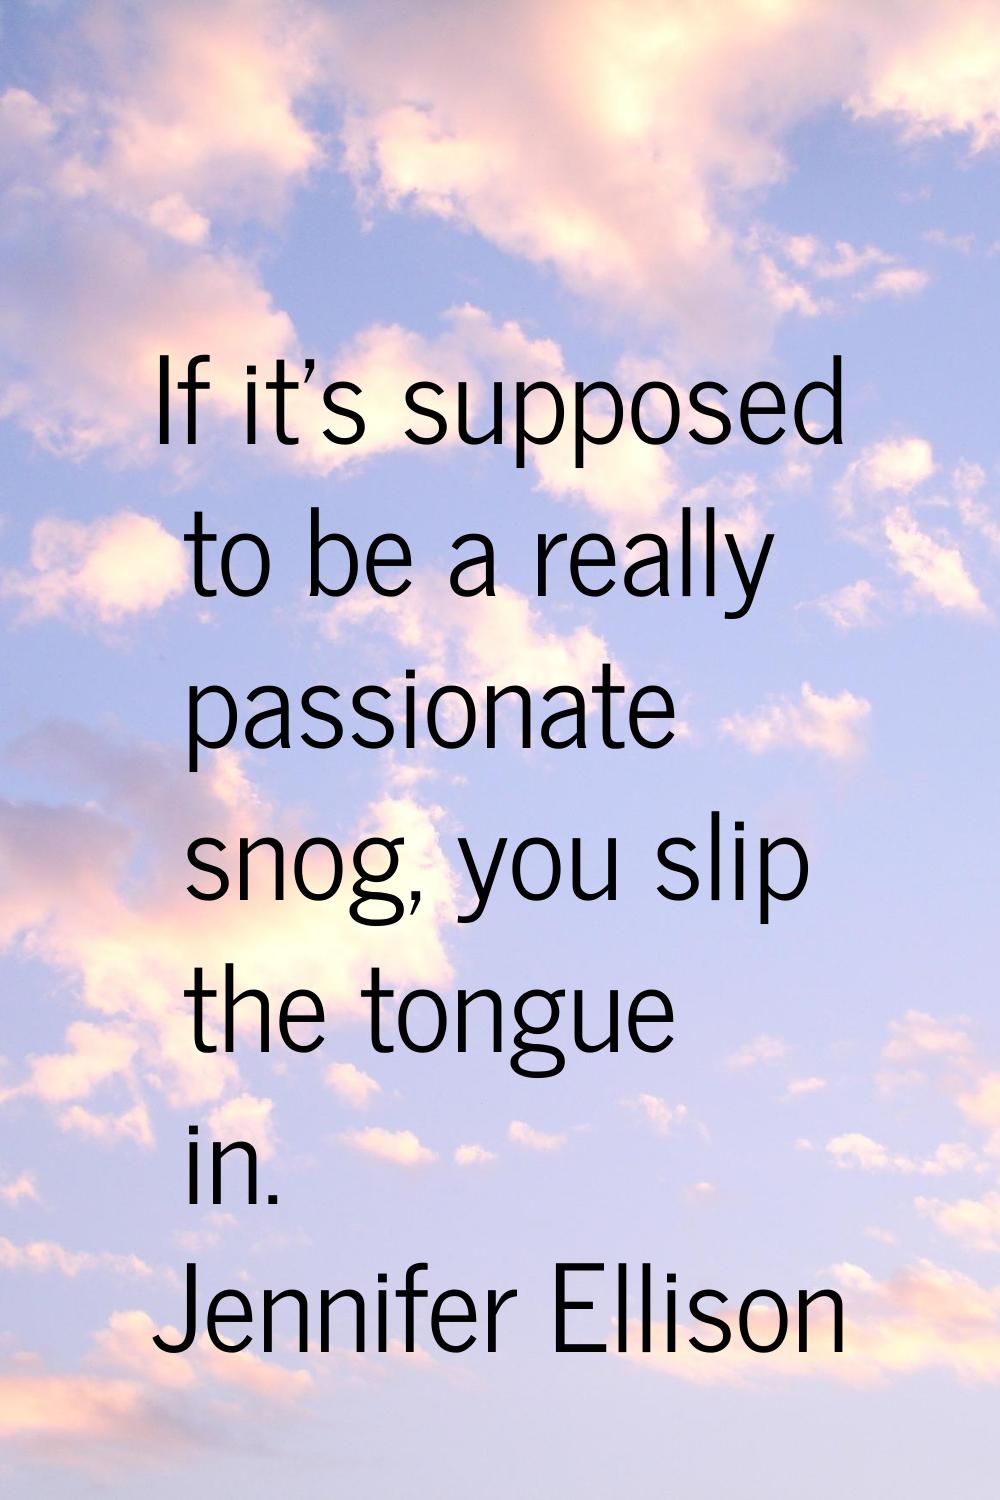 If it's supposed to be a really passionate snog, you slip the tongue in.